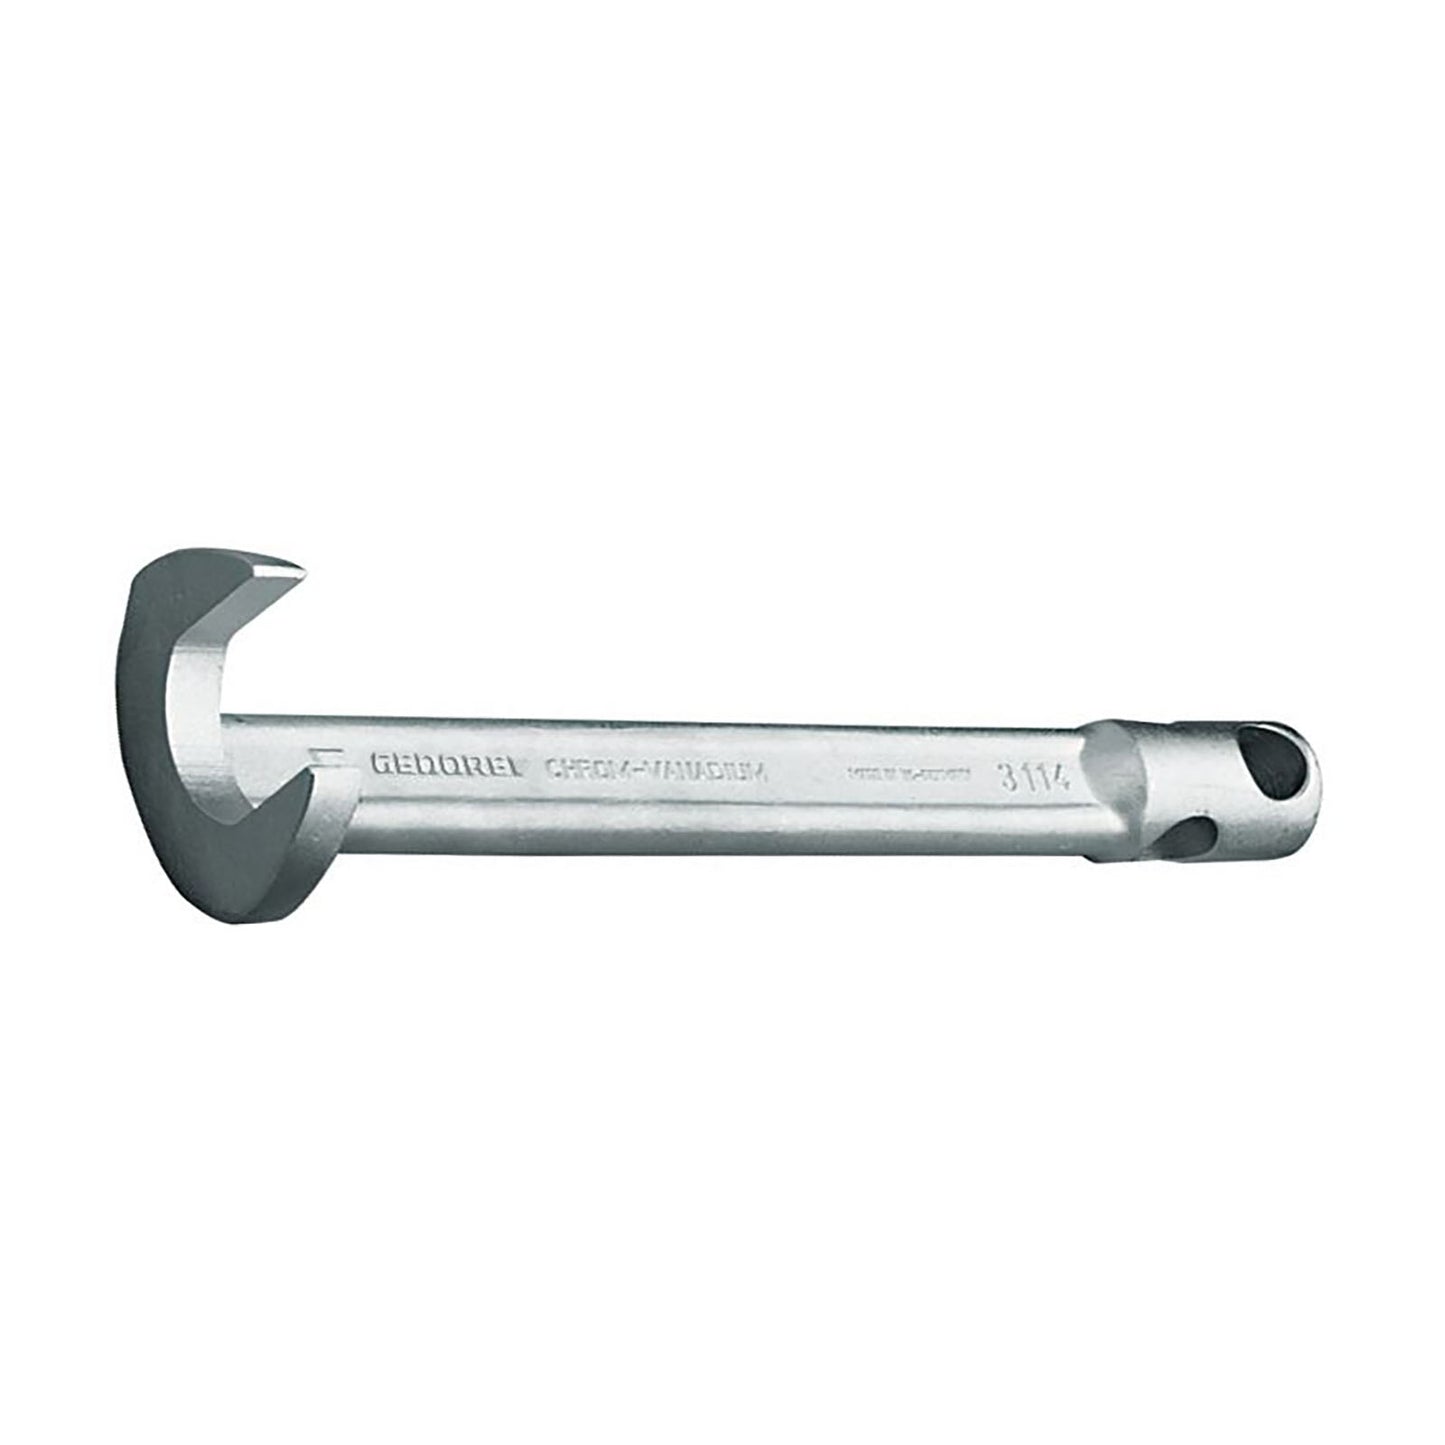 GEDORE 3114 19 - Forked Foot Wrench, 19mm (6670480)